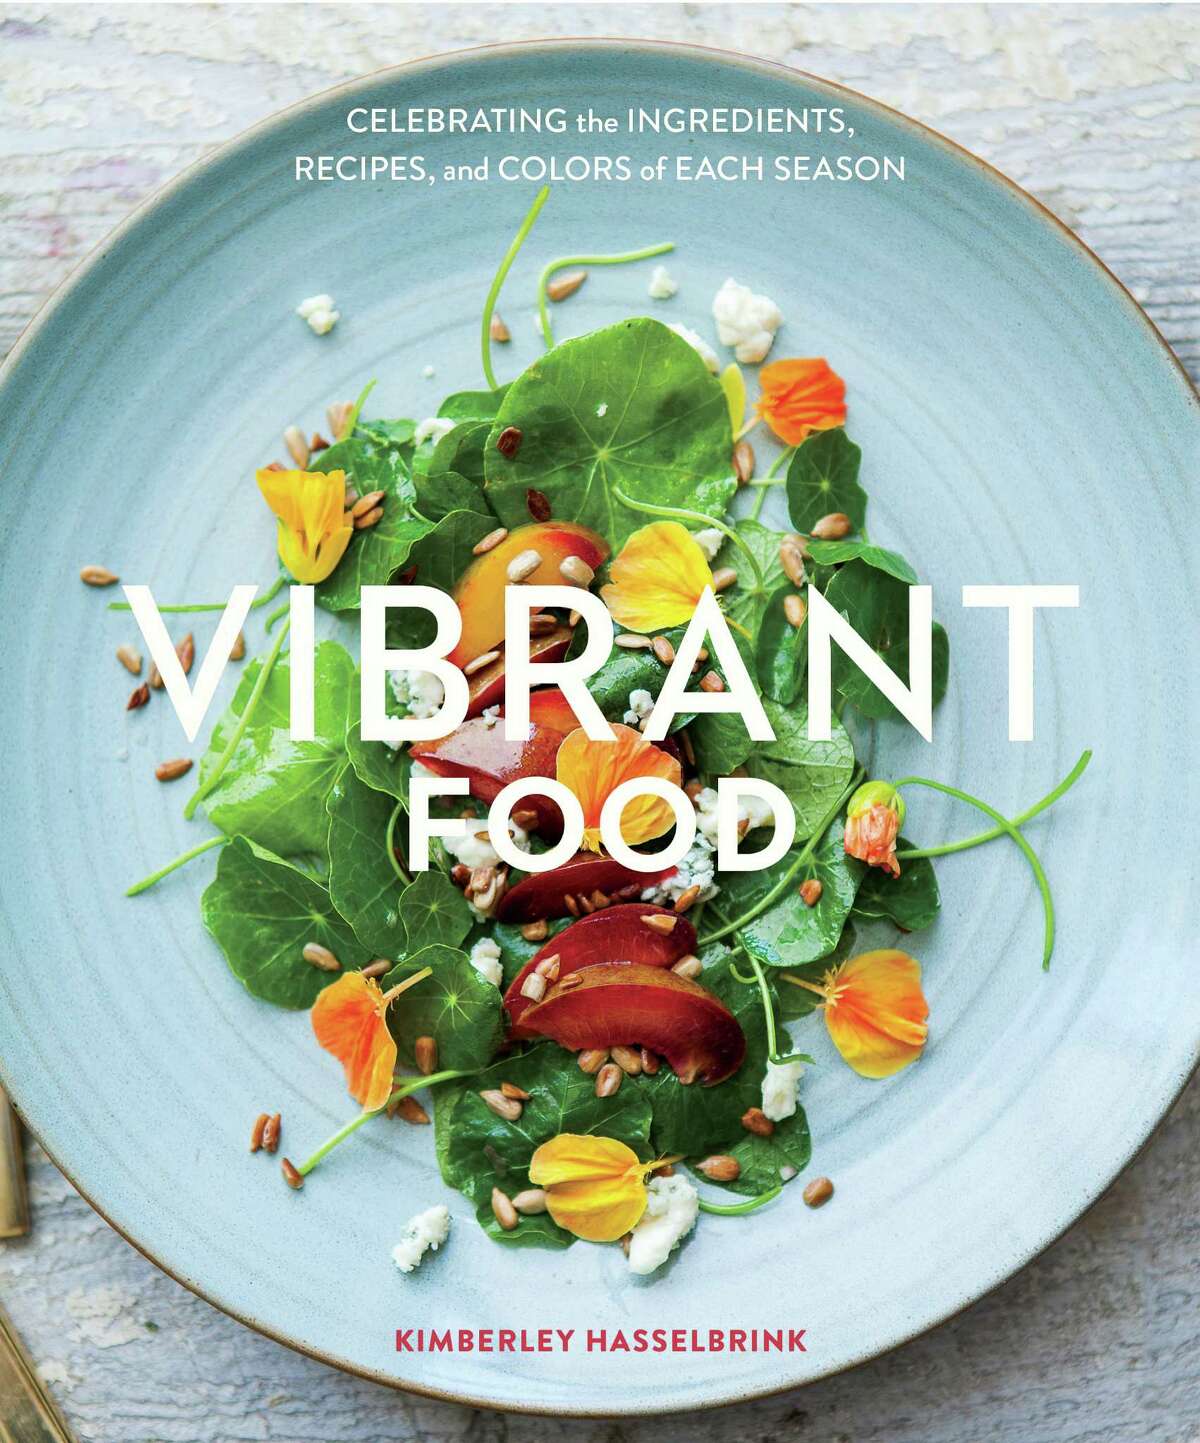 Vibrant Food, written and photographed by Kimberley Hasselbrink, permission from Ten Speed Press.